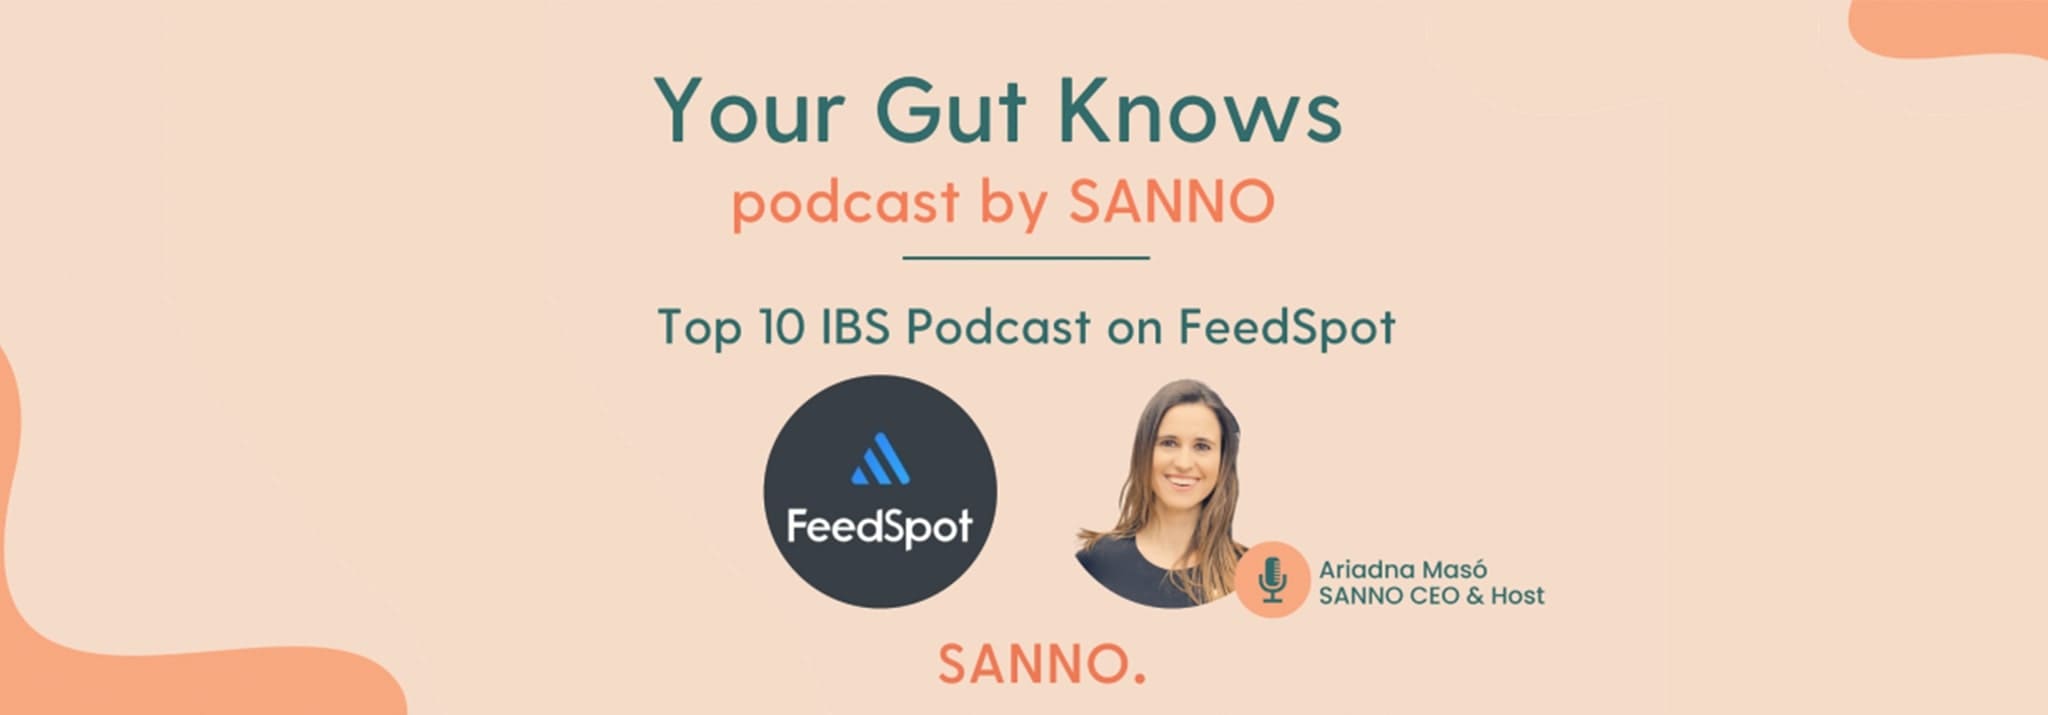 “Your Gut Knows” podcast by SANNO in top 10 IBS podcast